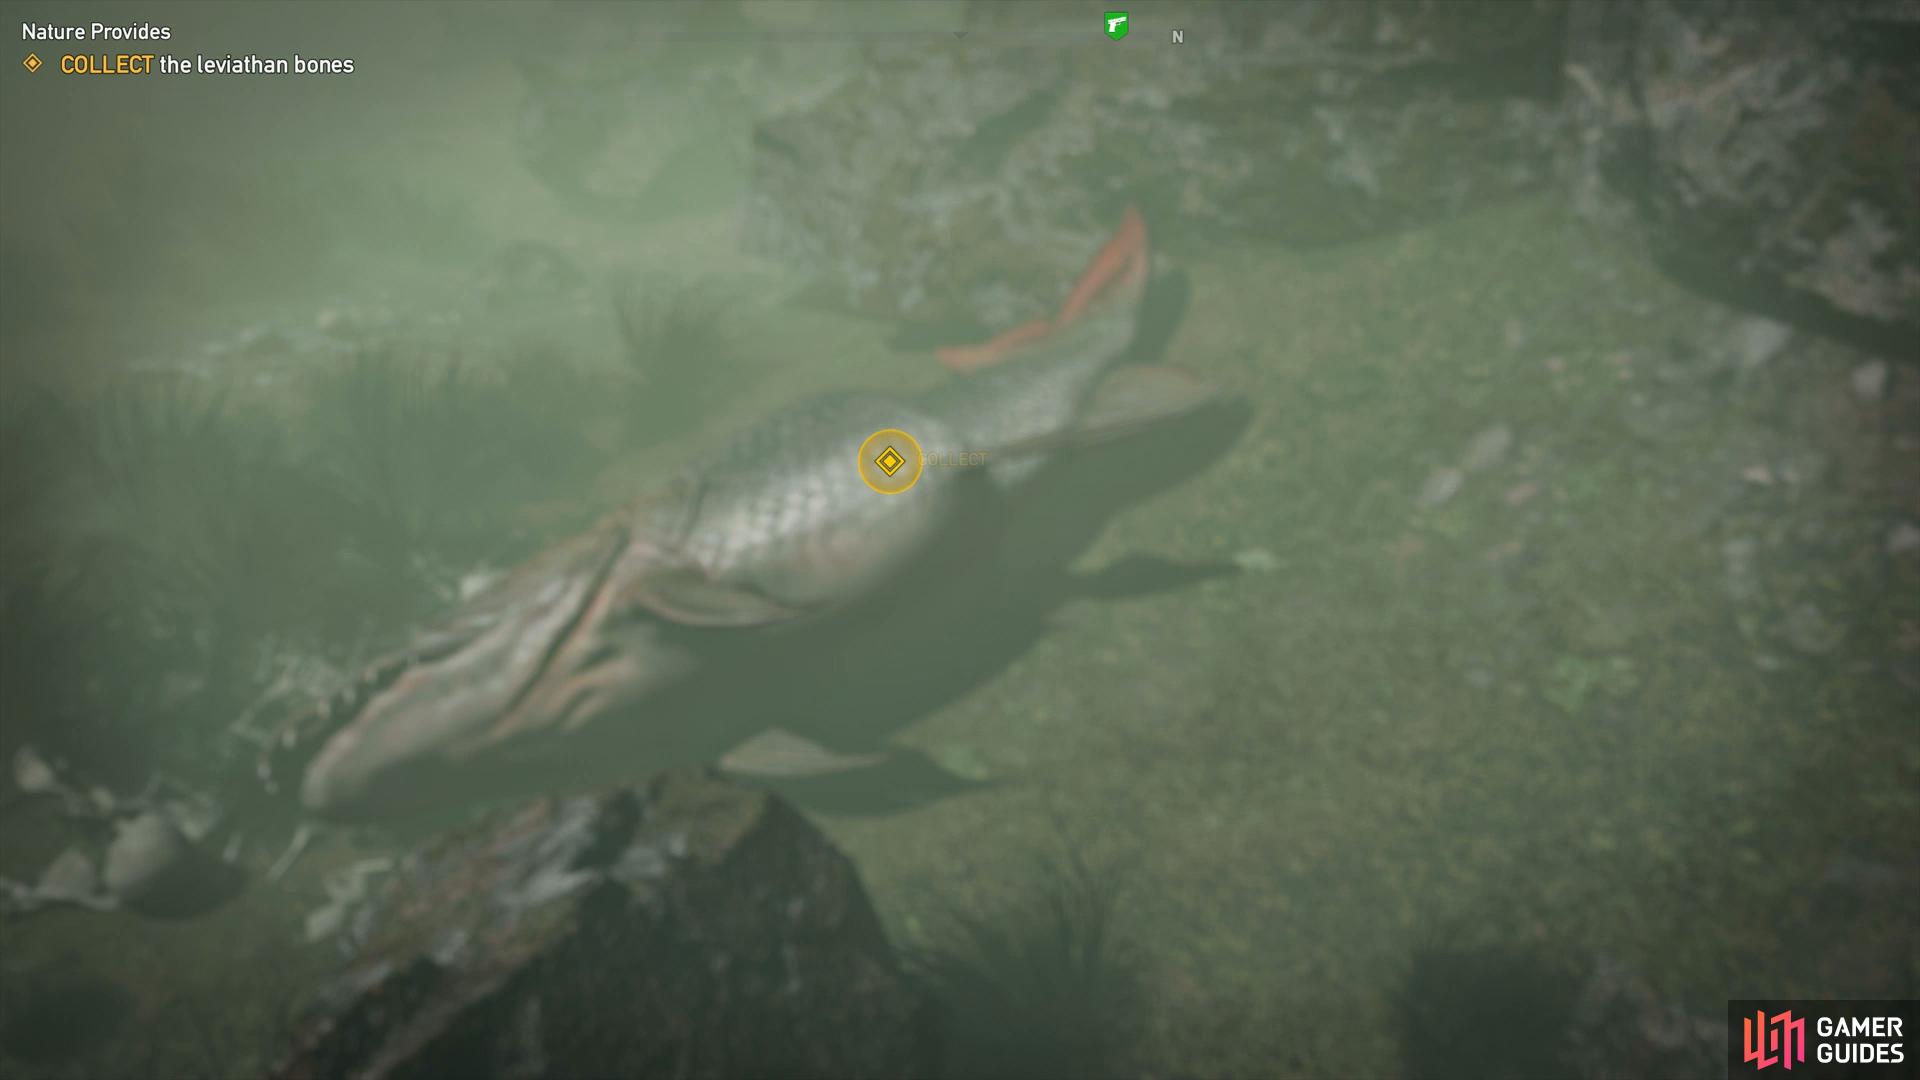 Youll want the Human Fish Perk so that you can swim under without any worries.